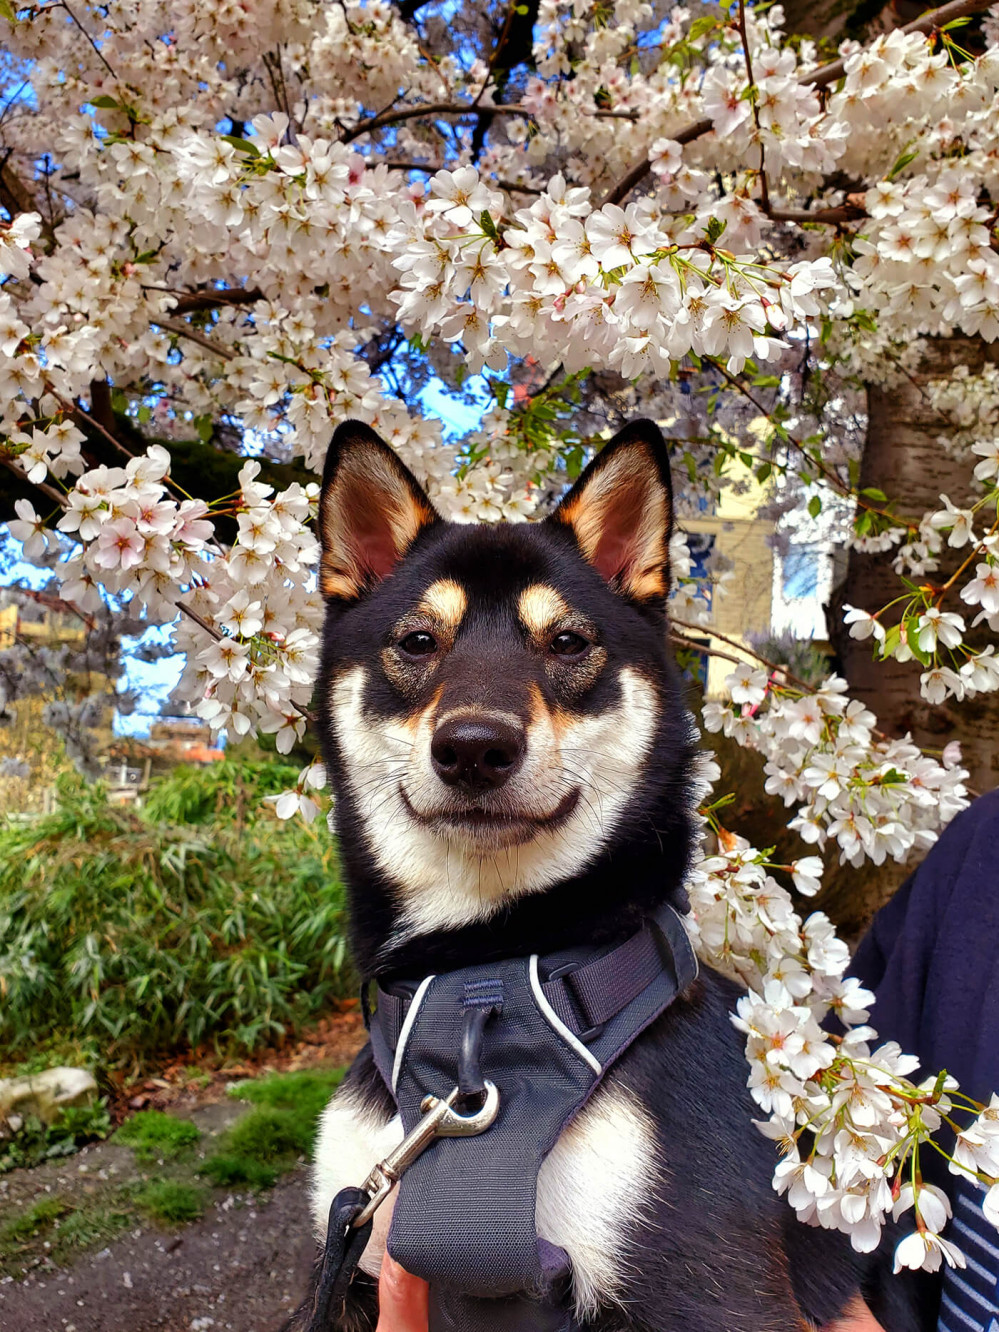 Soma the shiba inu posing for a portrait under a cherry blossom tree with a sly smile, like Mona Lisa.